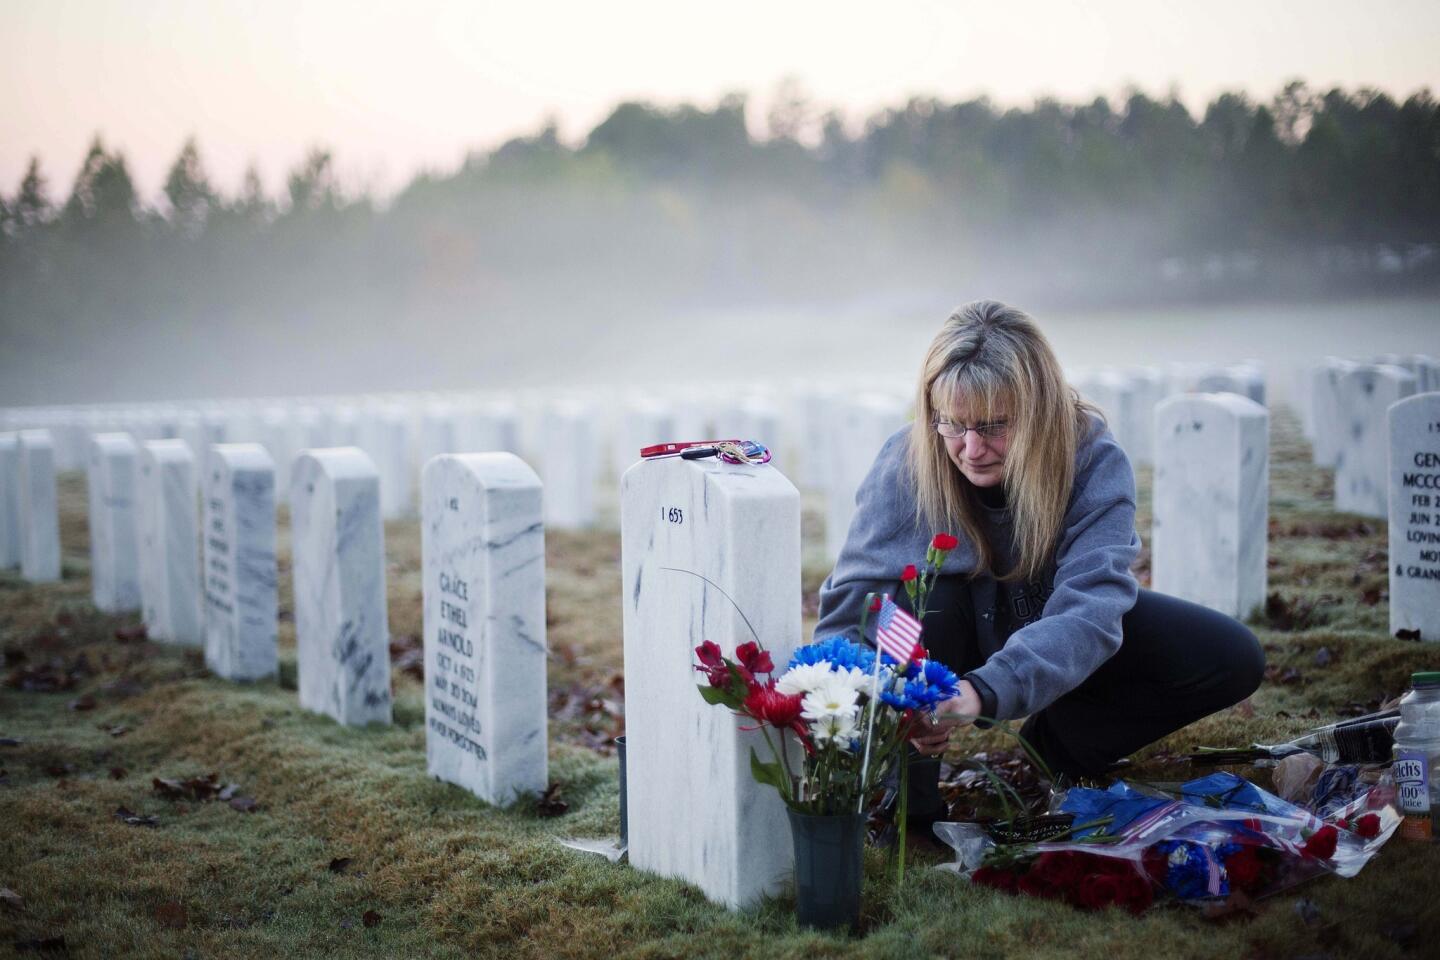 Jiffy Helton Sarver places flowers at the grave of her son, 1st Lt. Joseph Helton, Jr., who was killed while serving in Iraq in 2009, at Georgia National Cemetery in Canton, Ga. "This was his favorite time of day," said Sarver. "He loved sunrises."